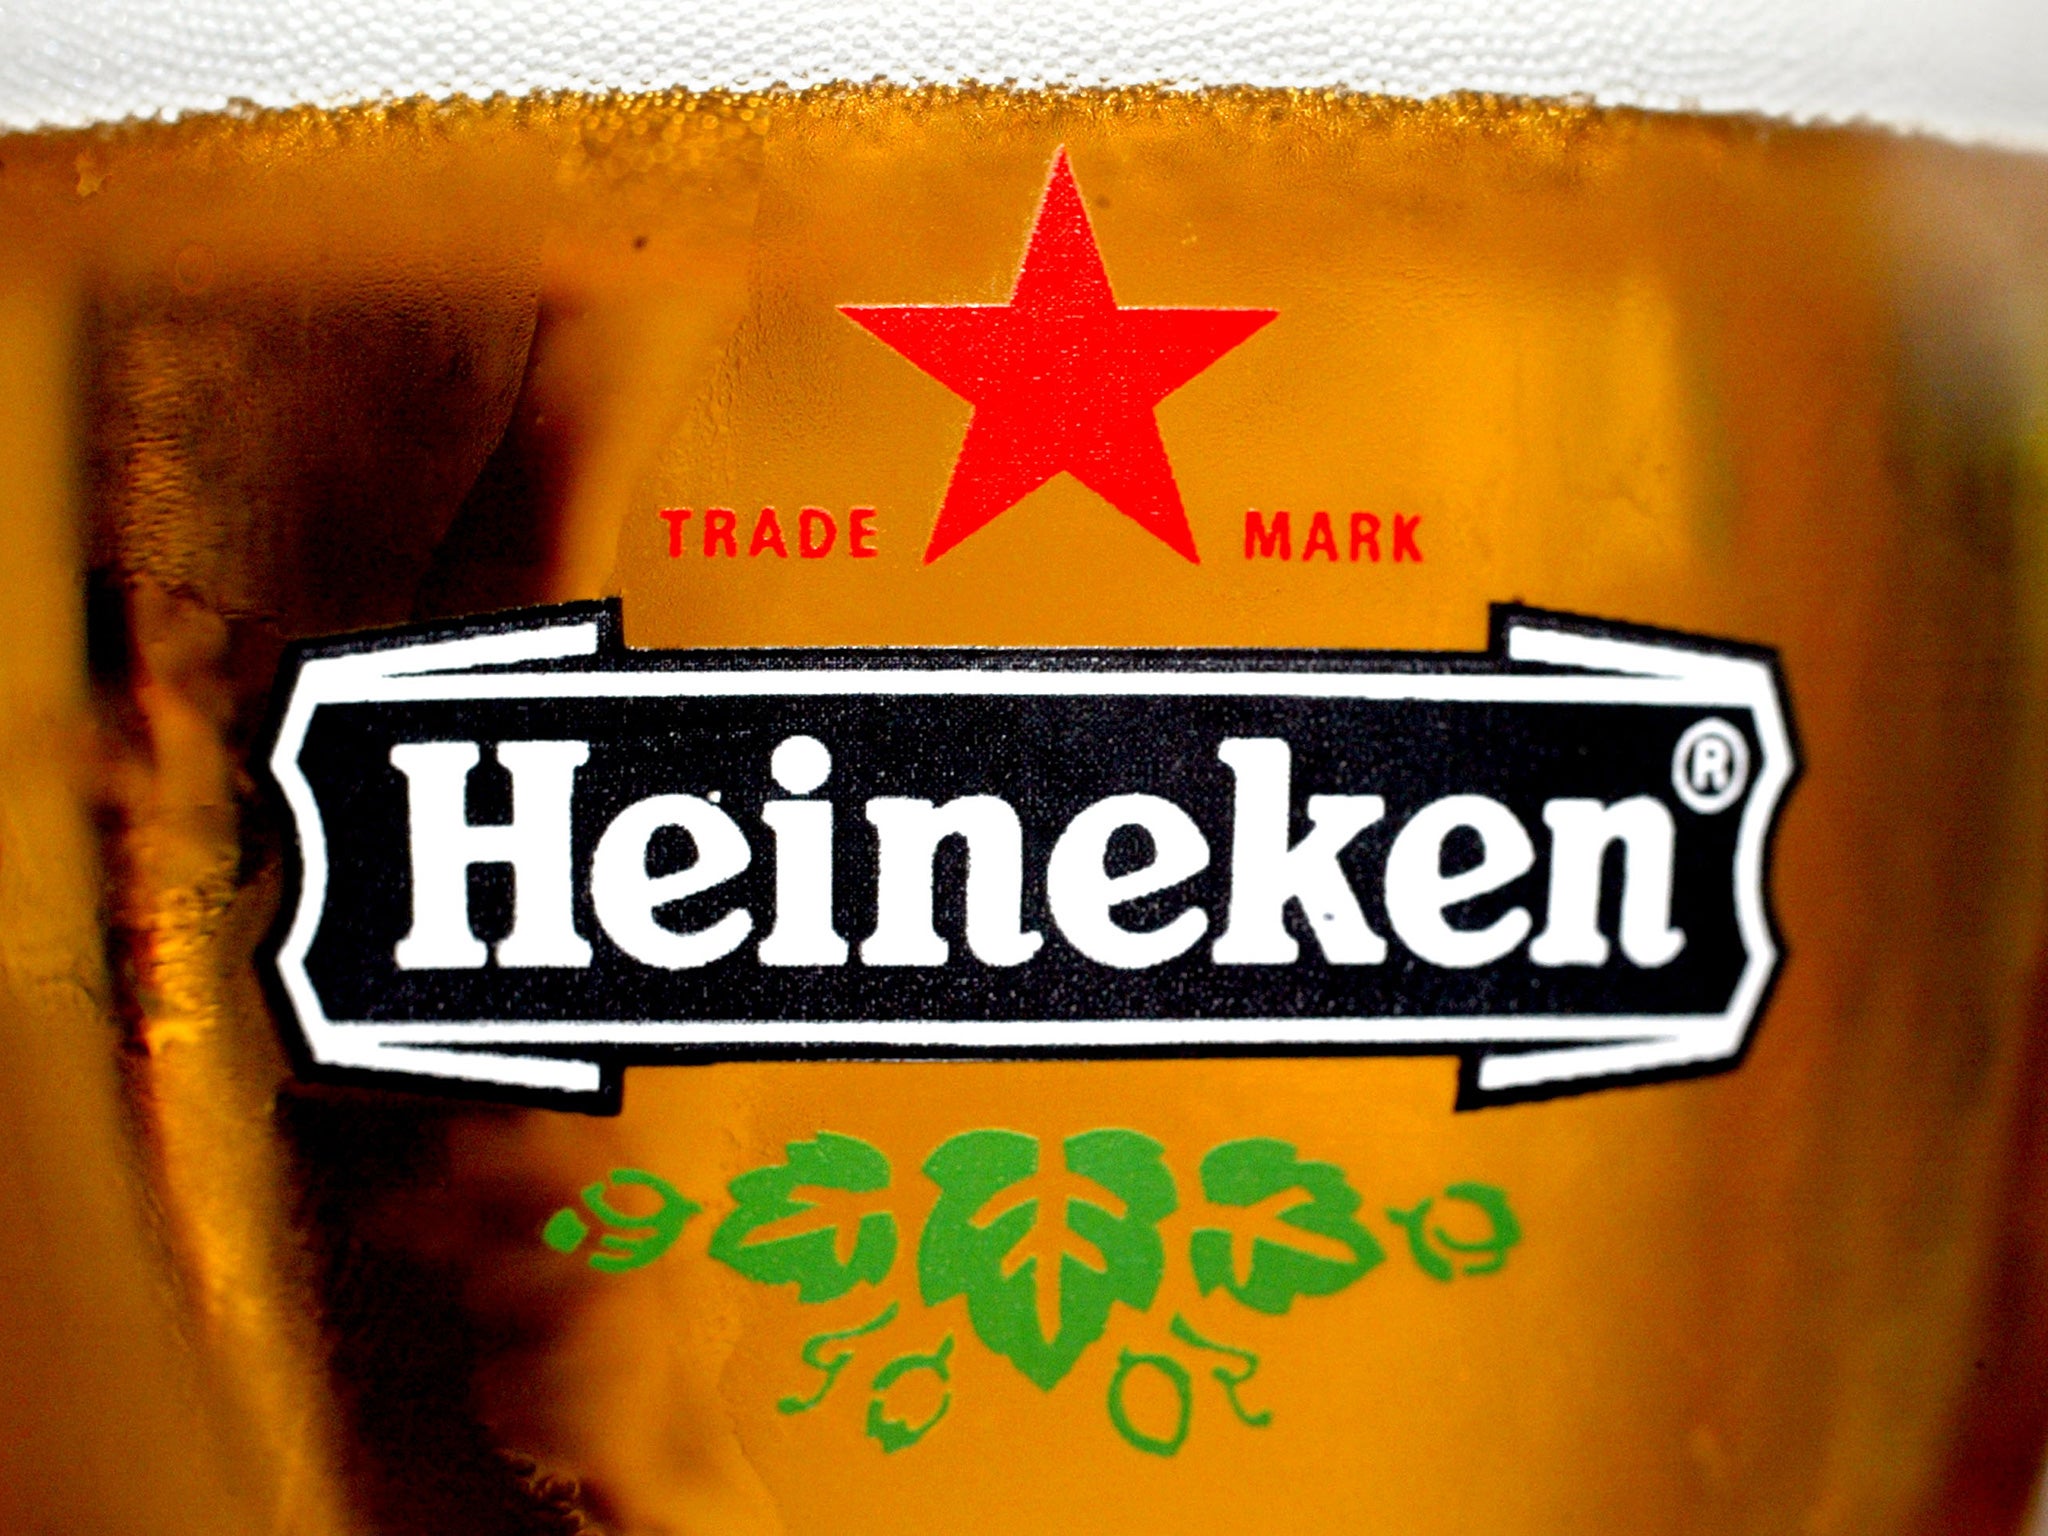 saudi-arabia-confiscates-heineken-beer-at-the-border-is-it-so-wrong-to